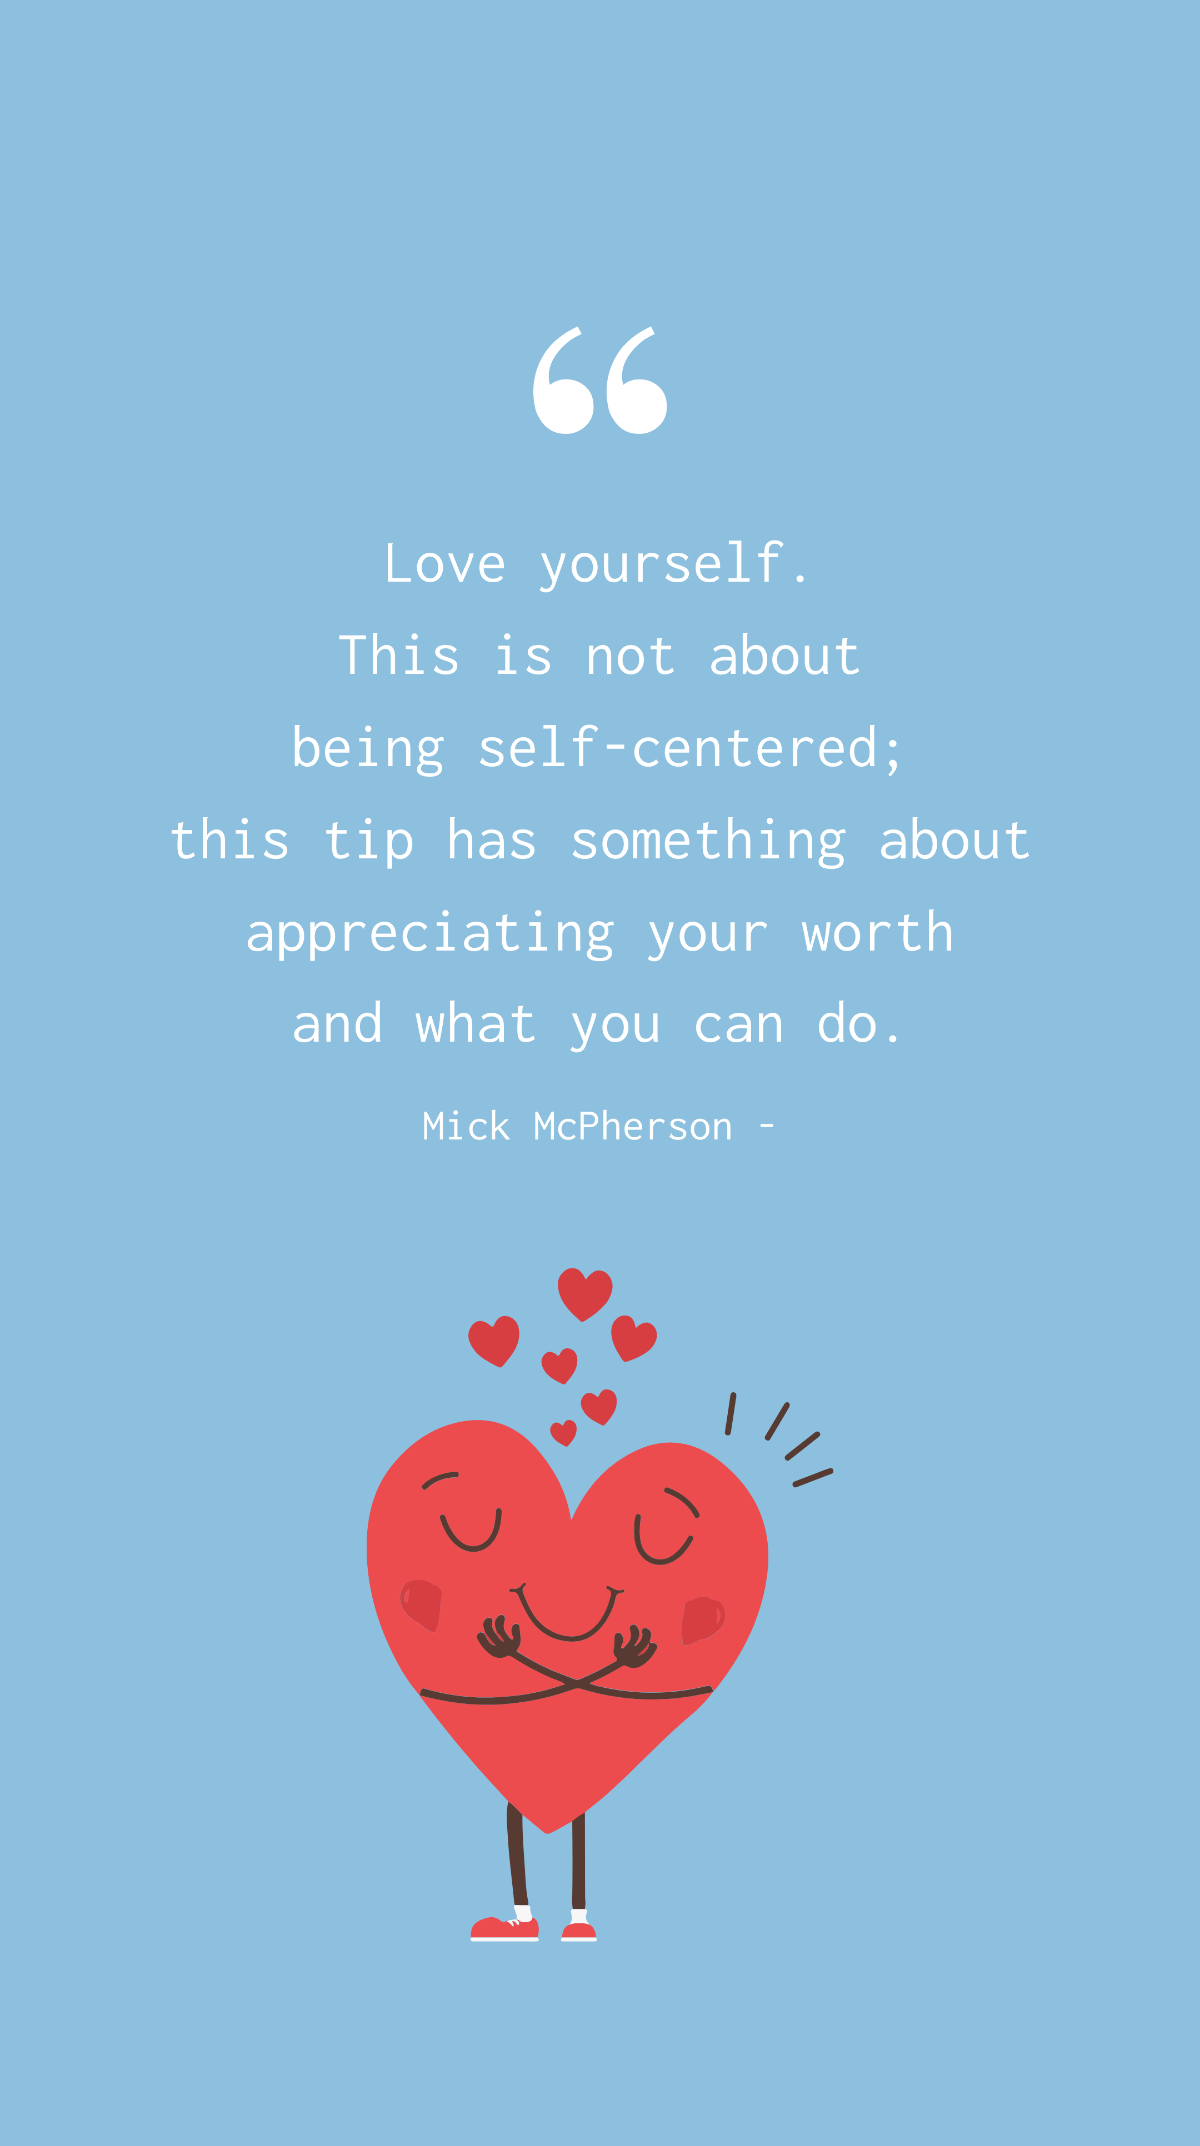 Free Mick McPherson - Love yourself. This is not about being self-centered; this tip has something about appreciating your worth and what you can do. Template